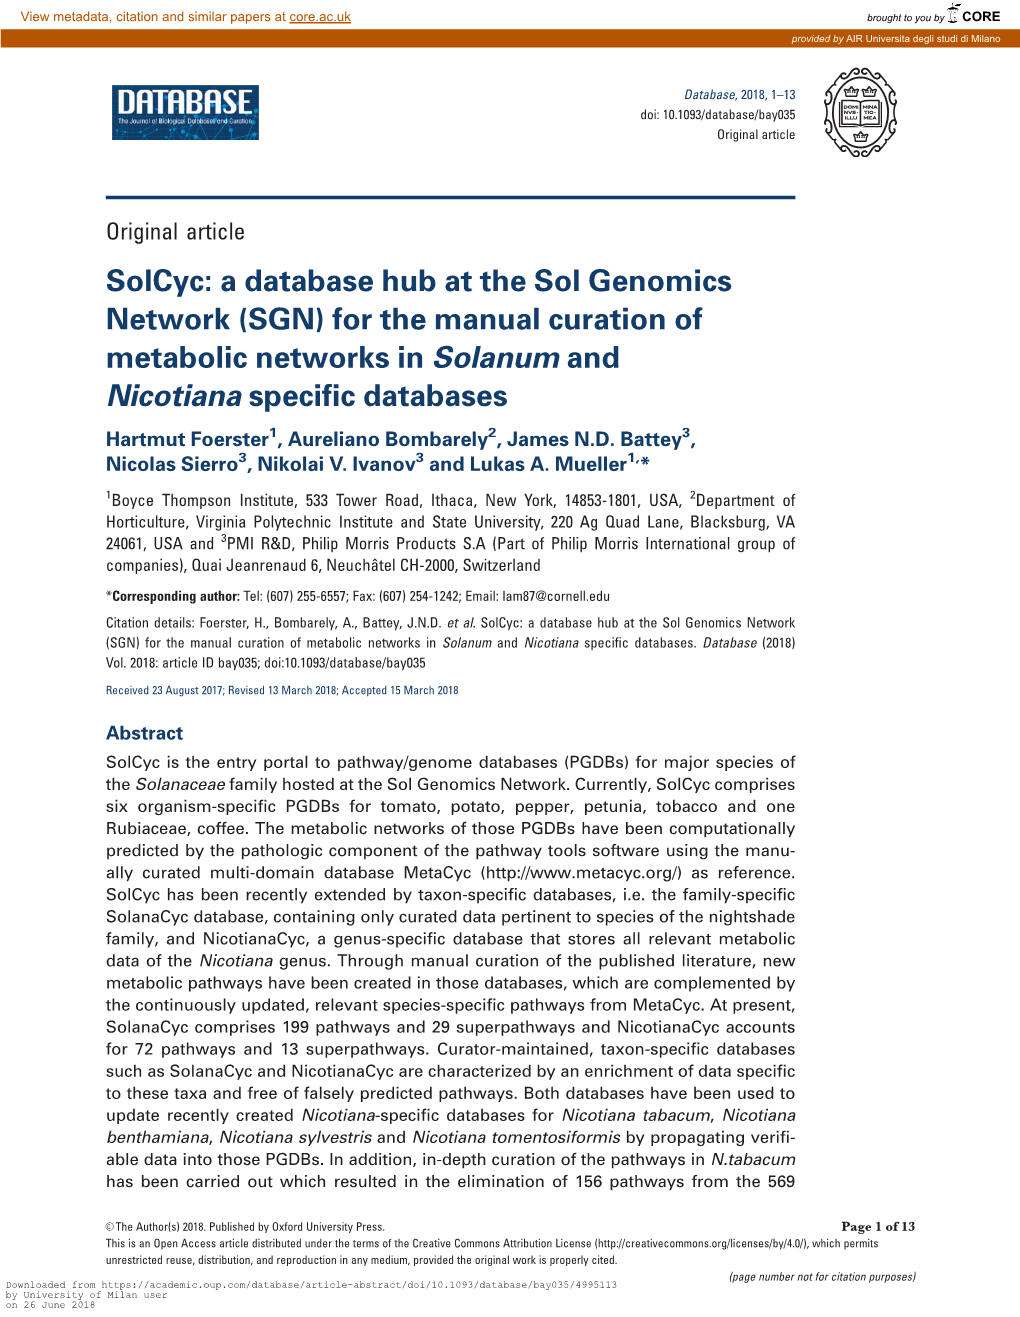 For the Manual Curation of Metabolic Networks in Solanum and Nicotiana Specific Databases Hartmut Foerster1, Aureliano Bombarely2, James N.D